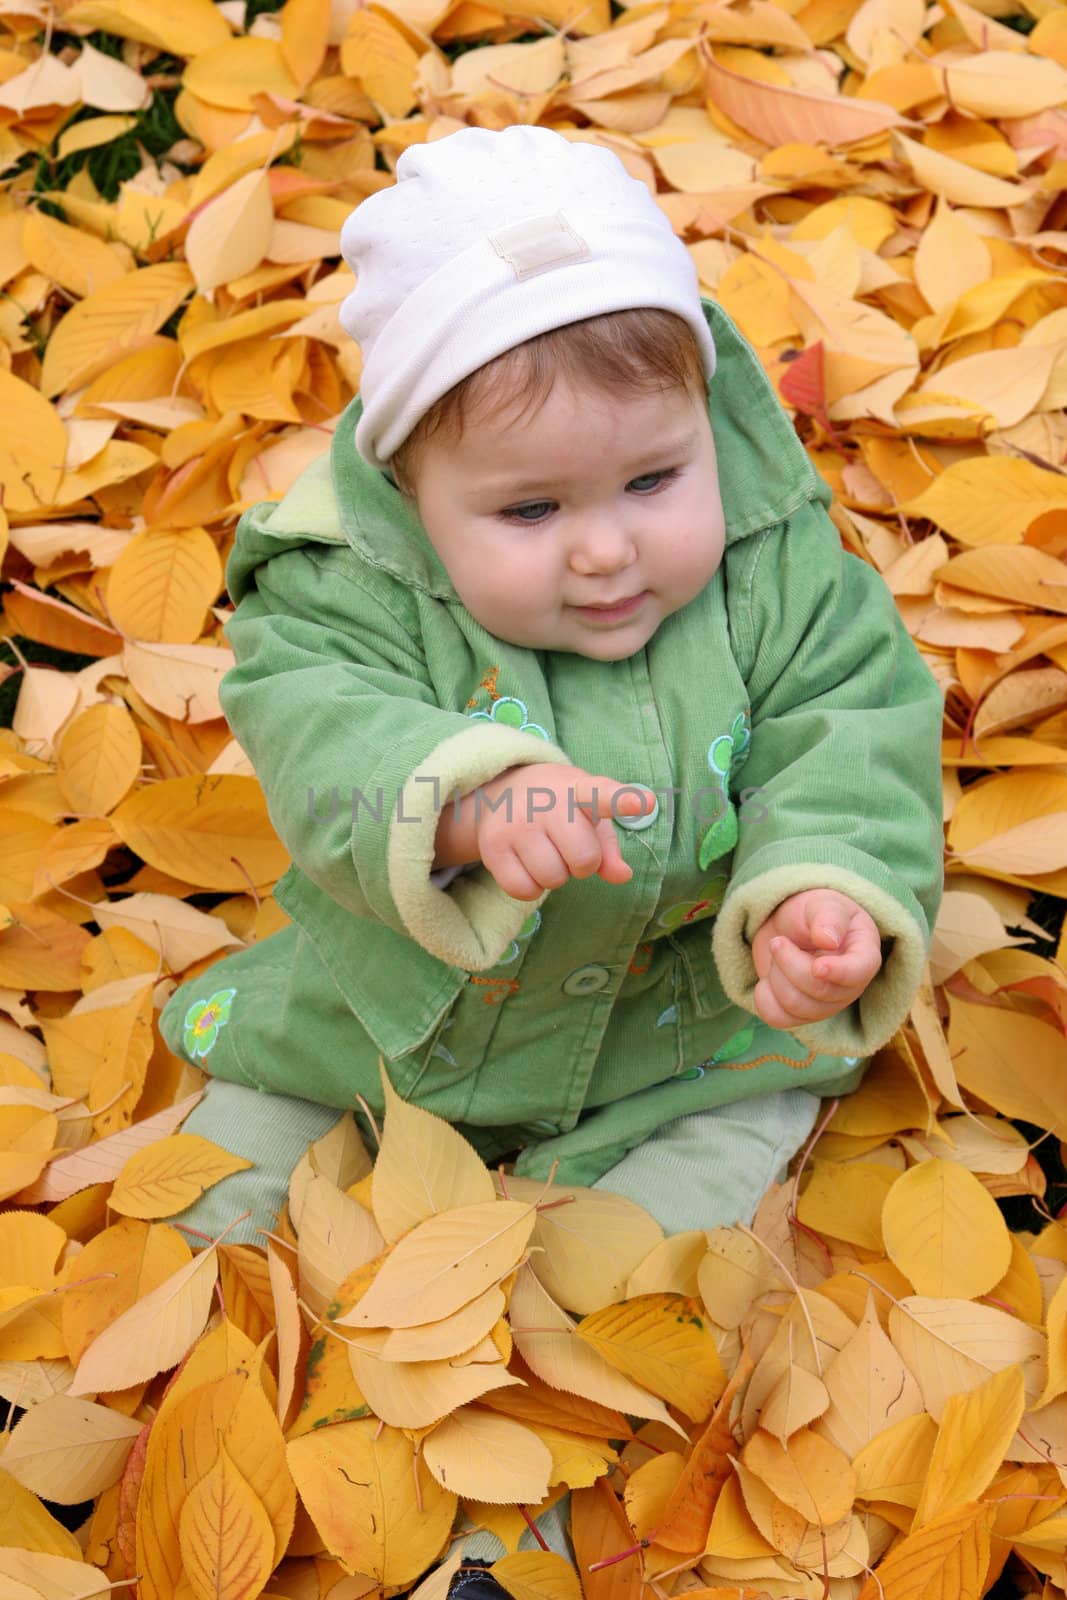 baby at a park in Autumn by vladacanon